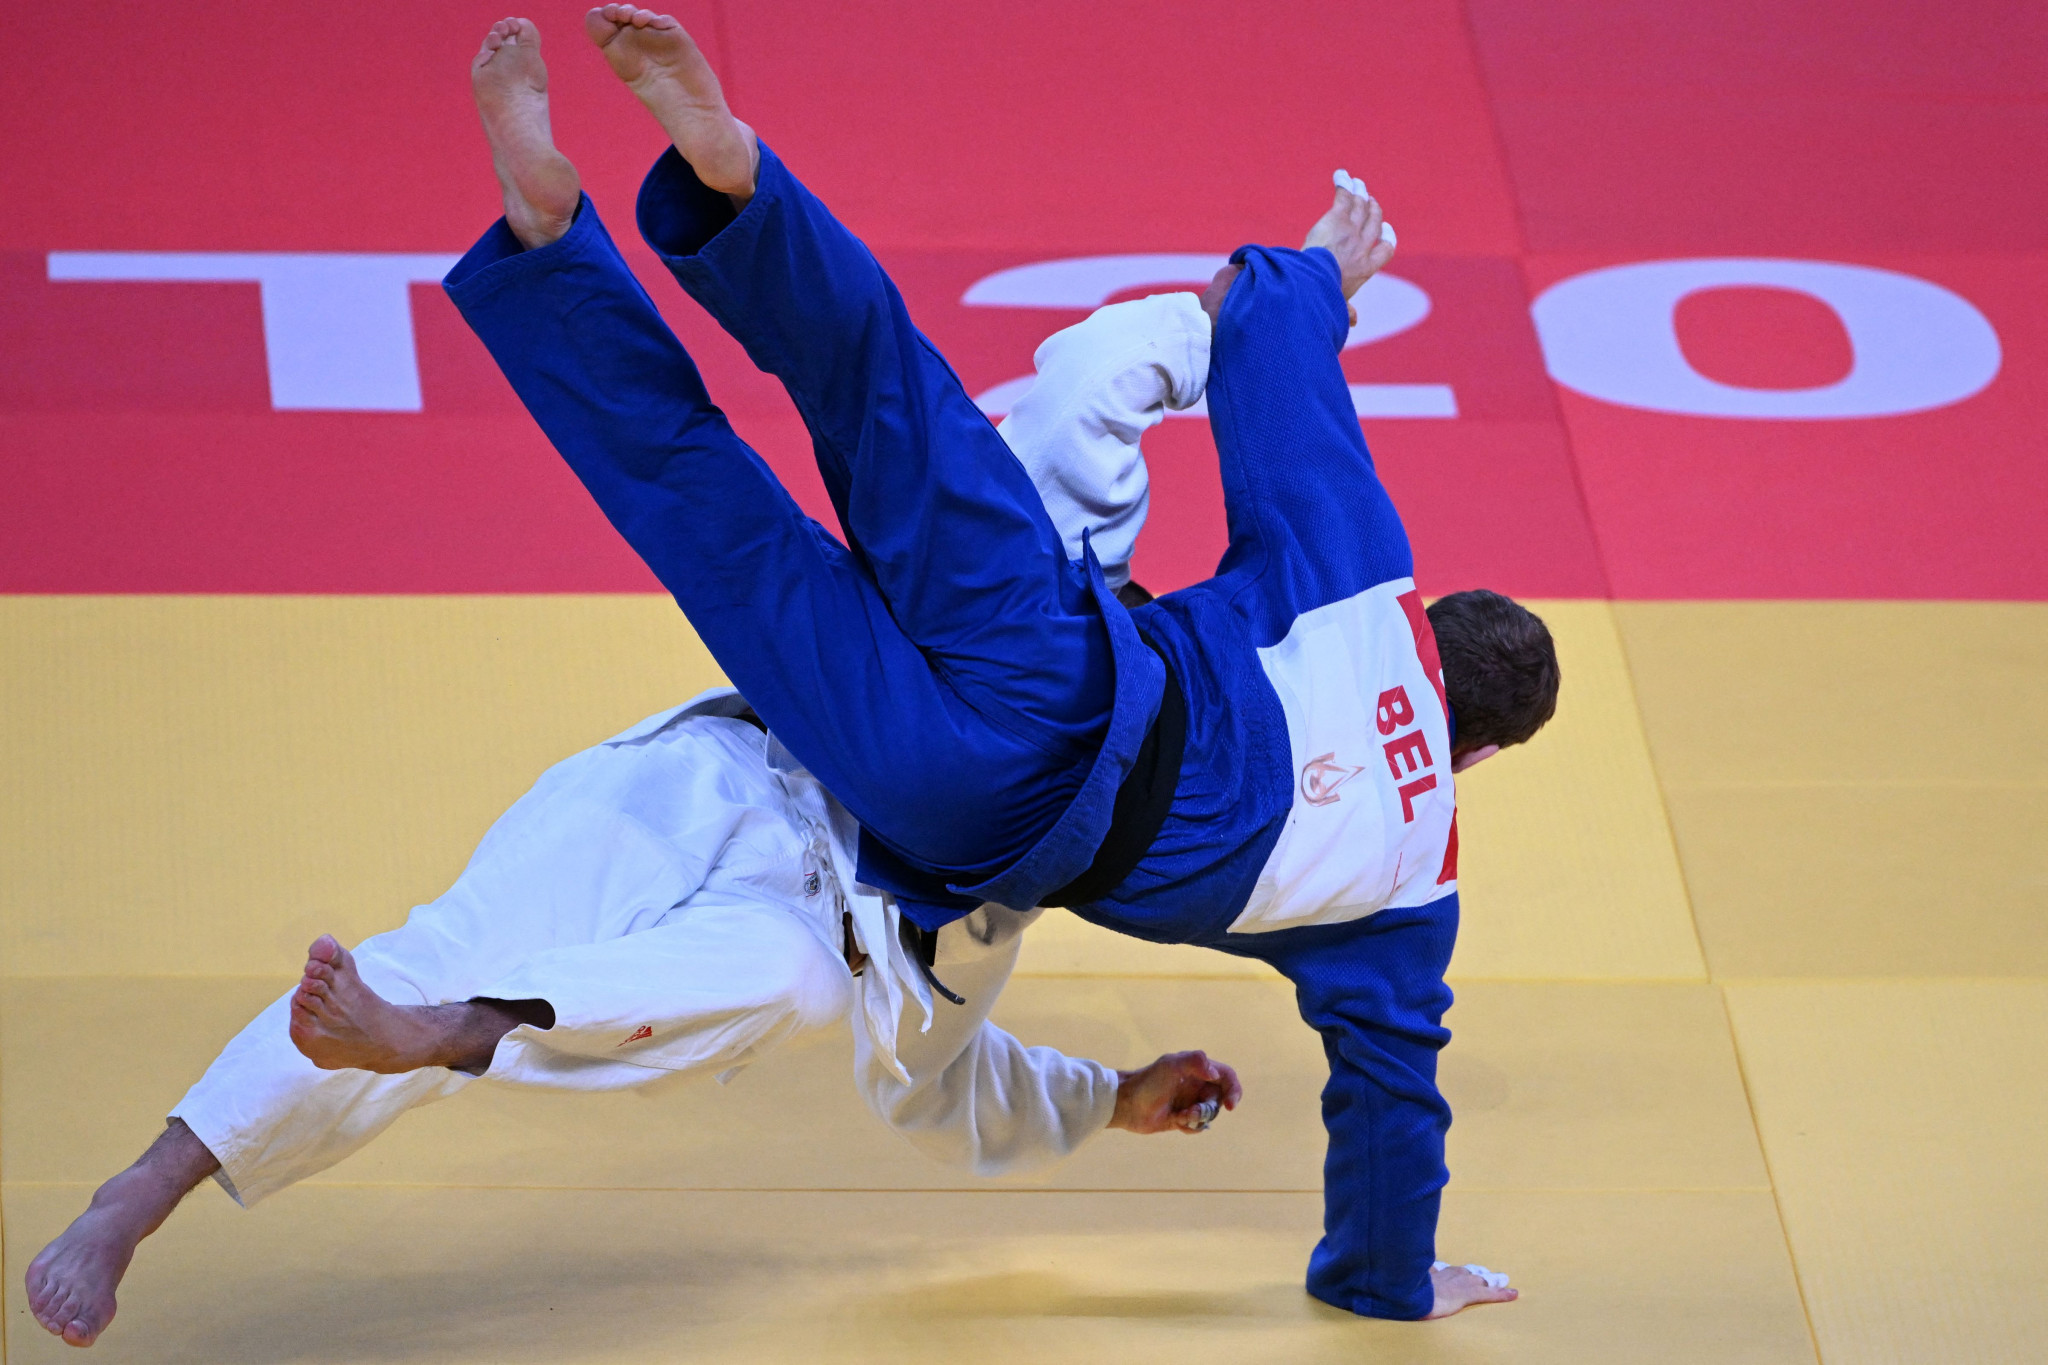 In a rematch of last year's final, Tato Grigalashvili of Georgia, left, beat Belgian Matthias Casse with a golden-score ippon ©Getty Images